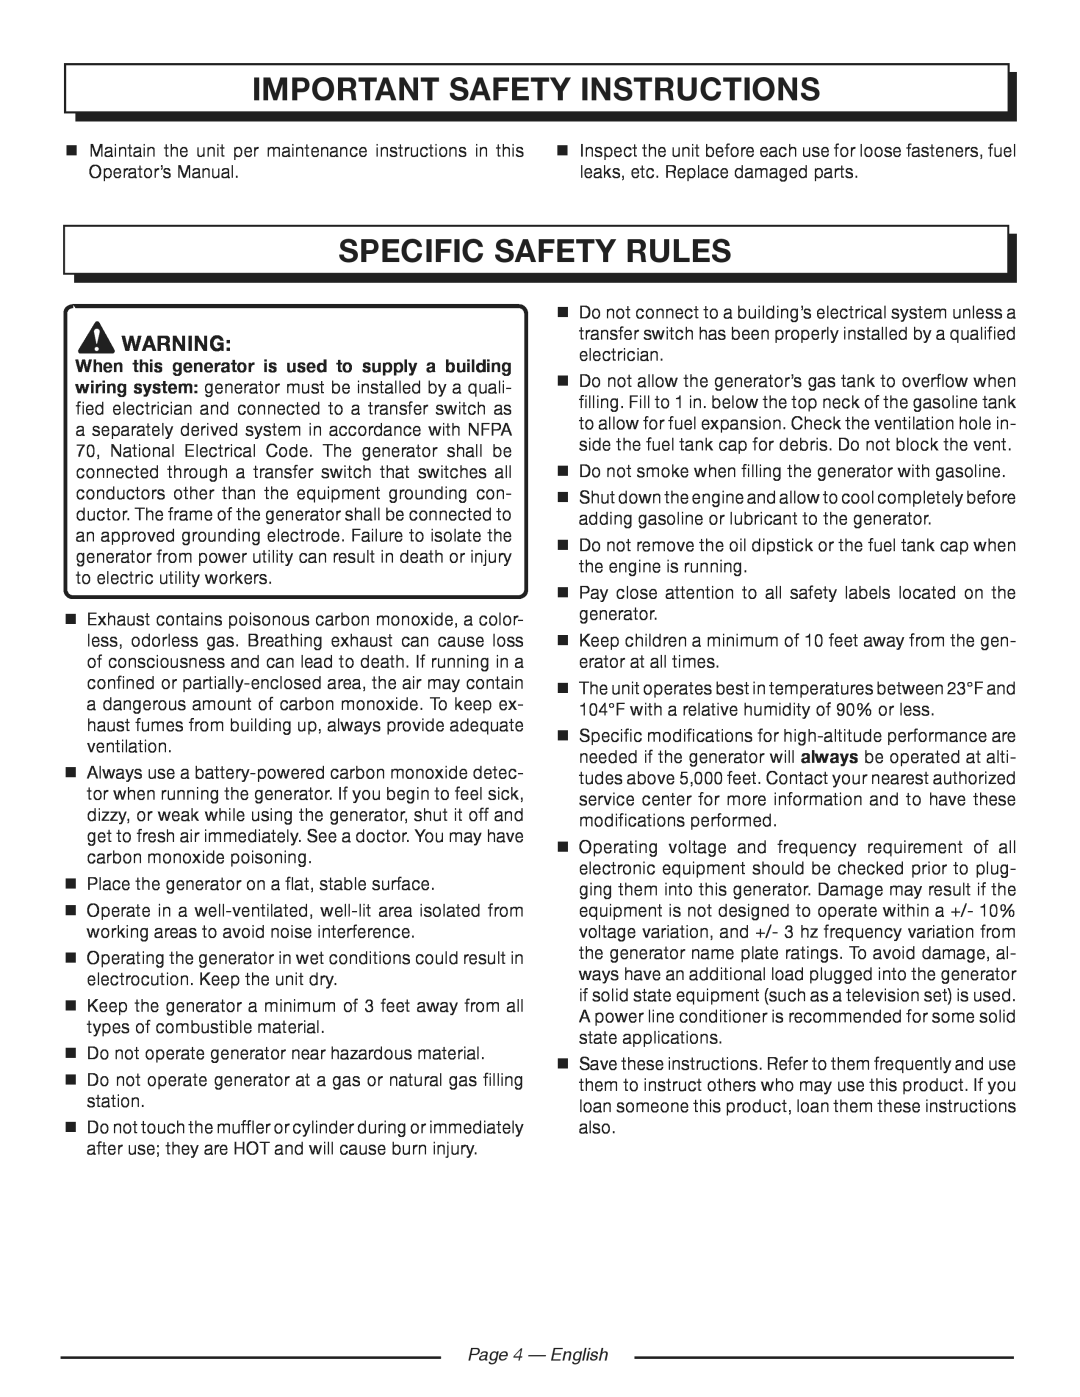 Homelite HG5700 manuel dutilisation Specific Safety Rules, important safety instructions, Page  - English 